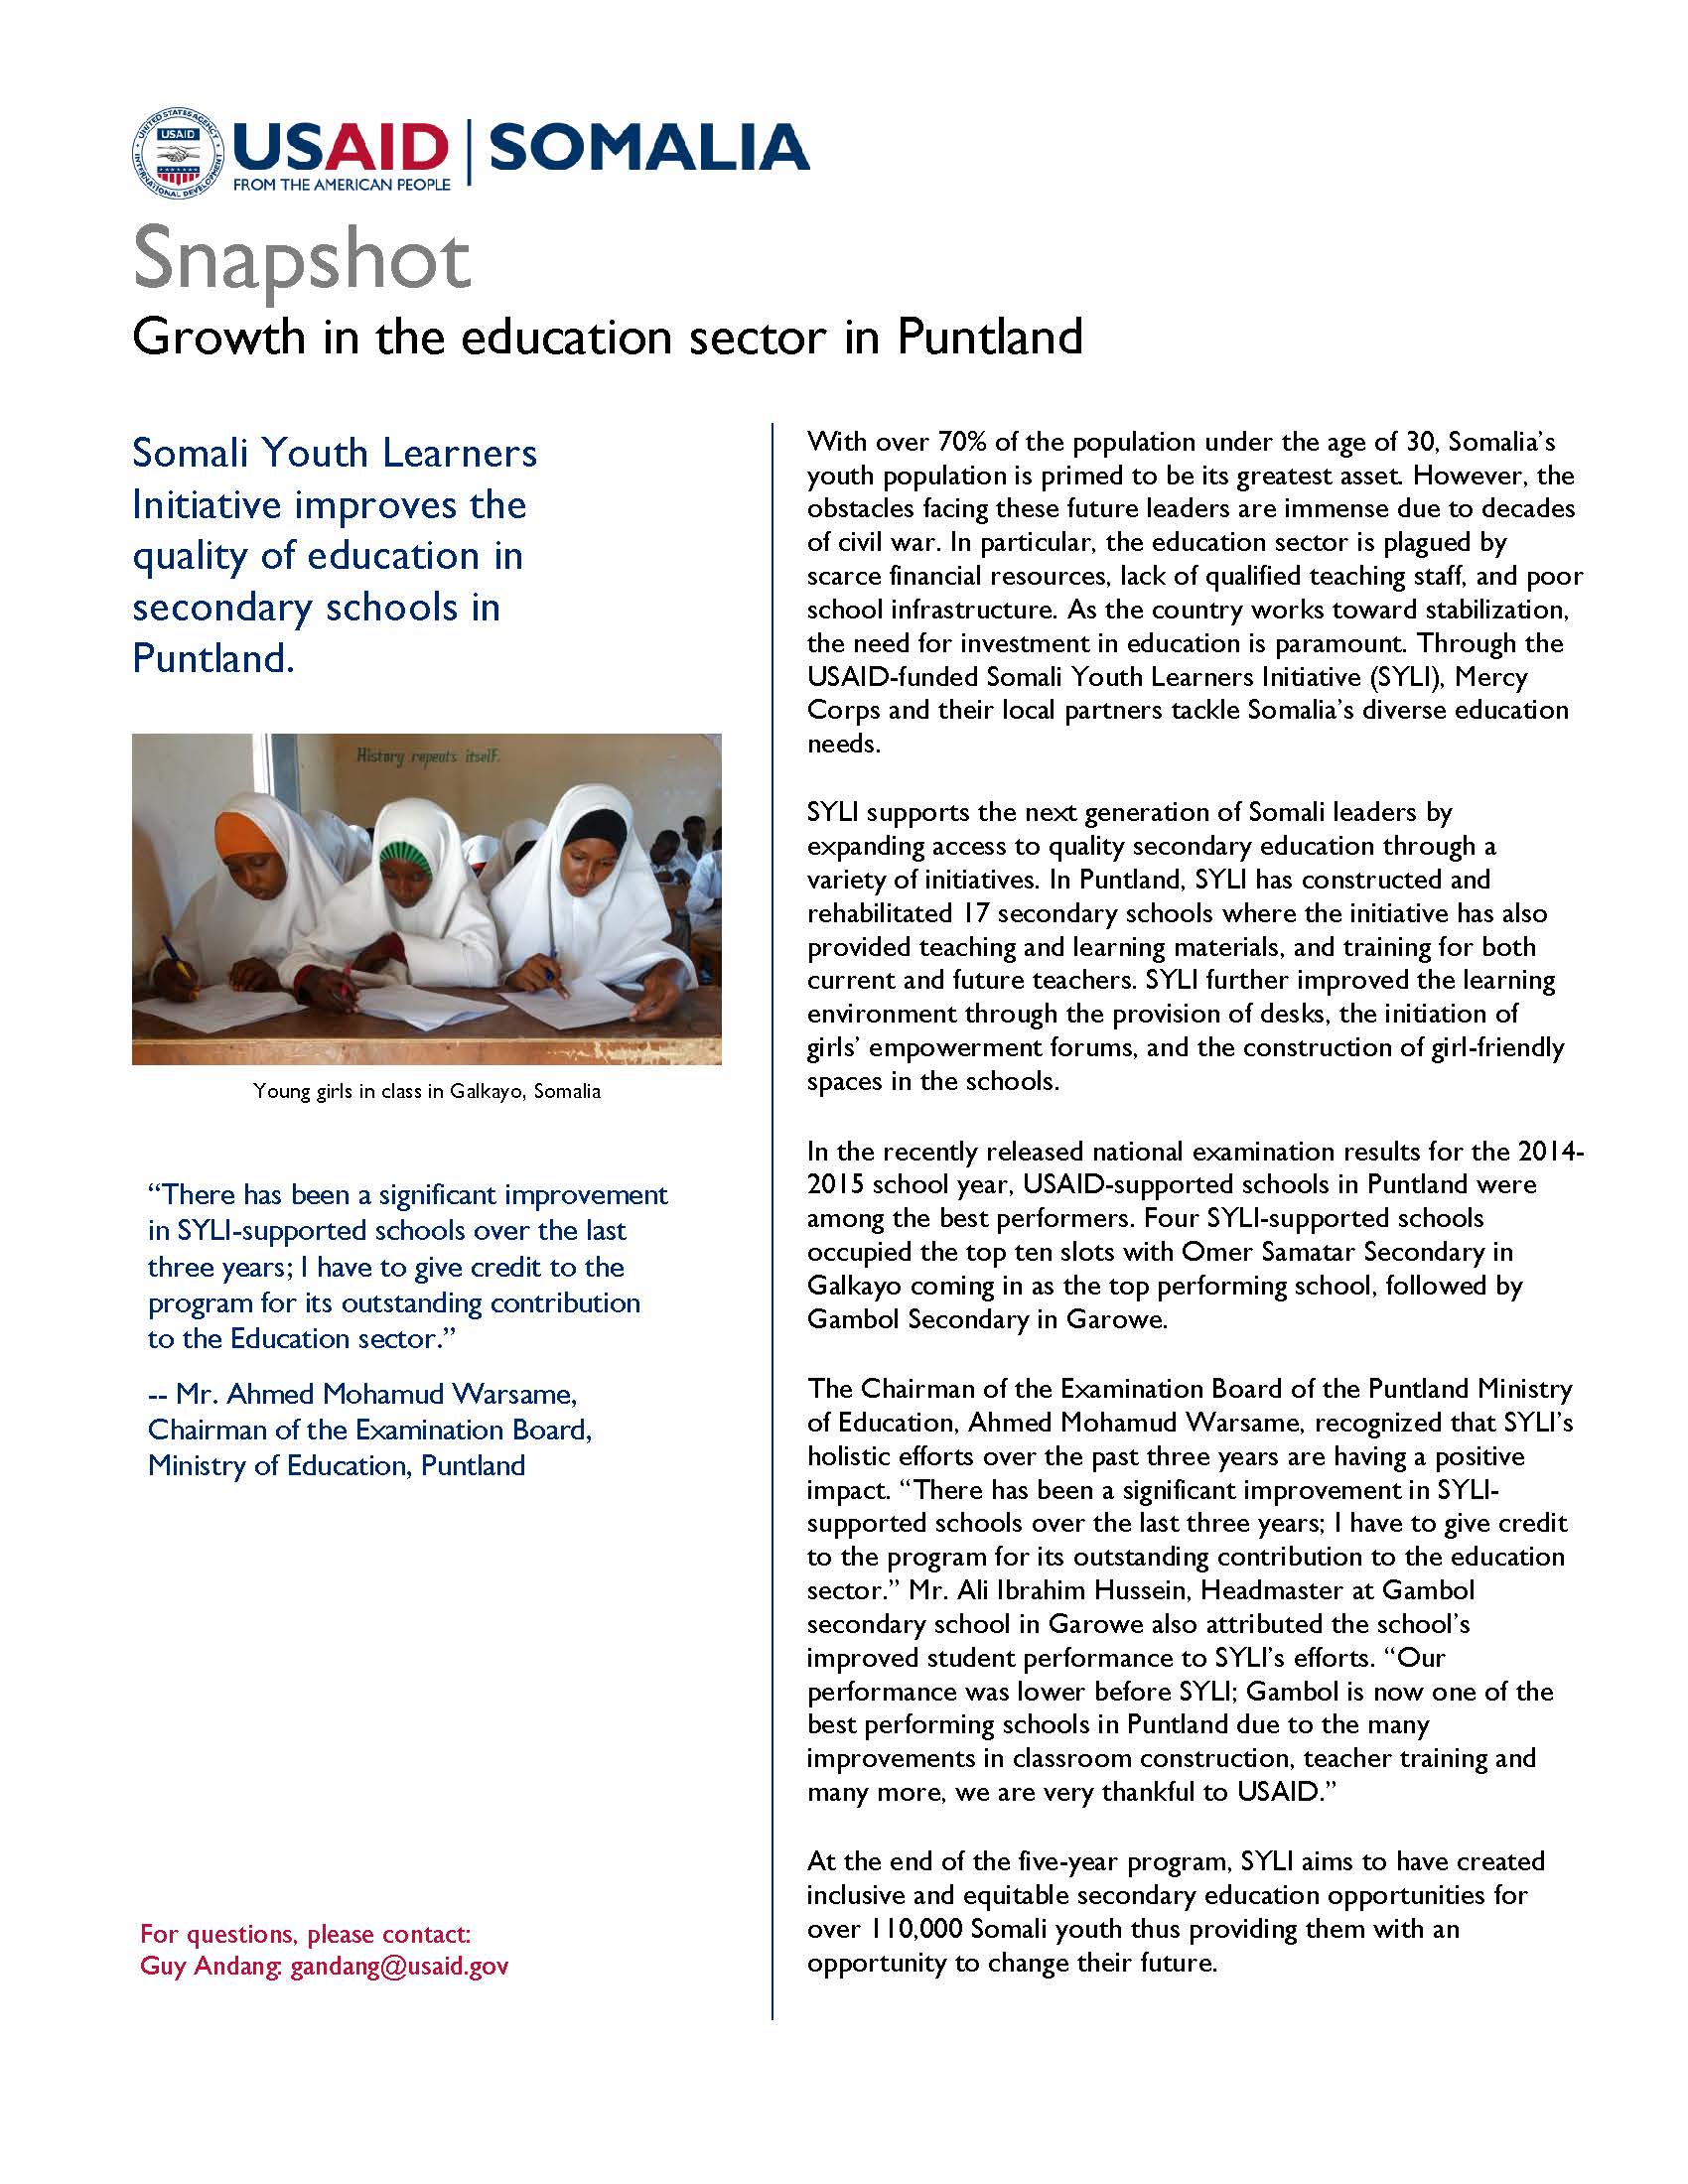 Growth in the education sector in Puntland